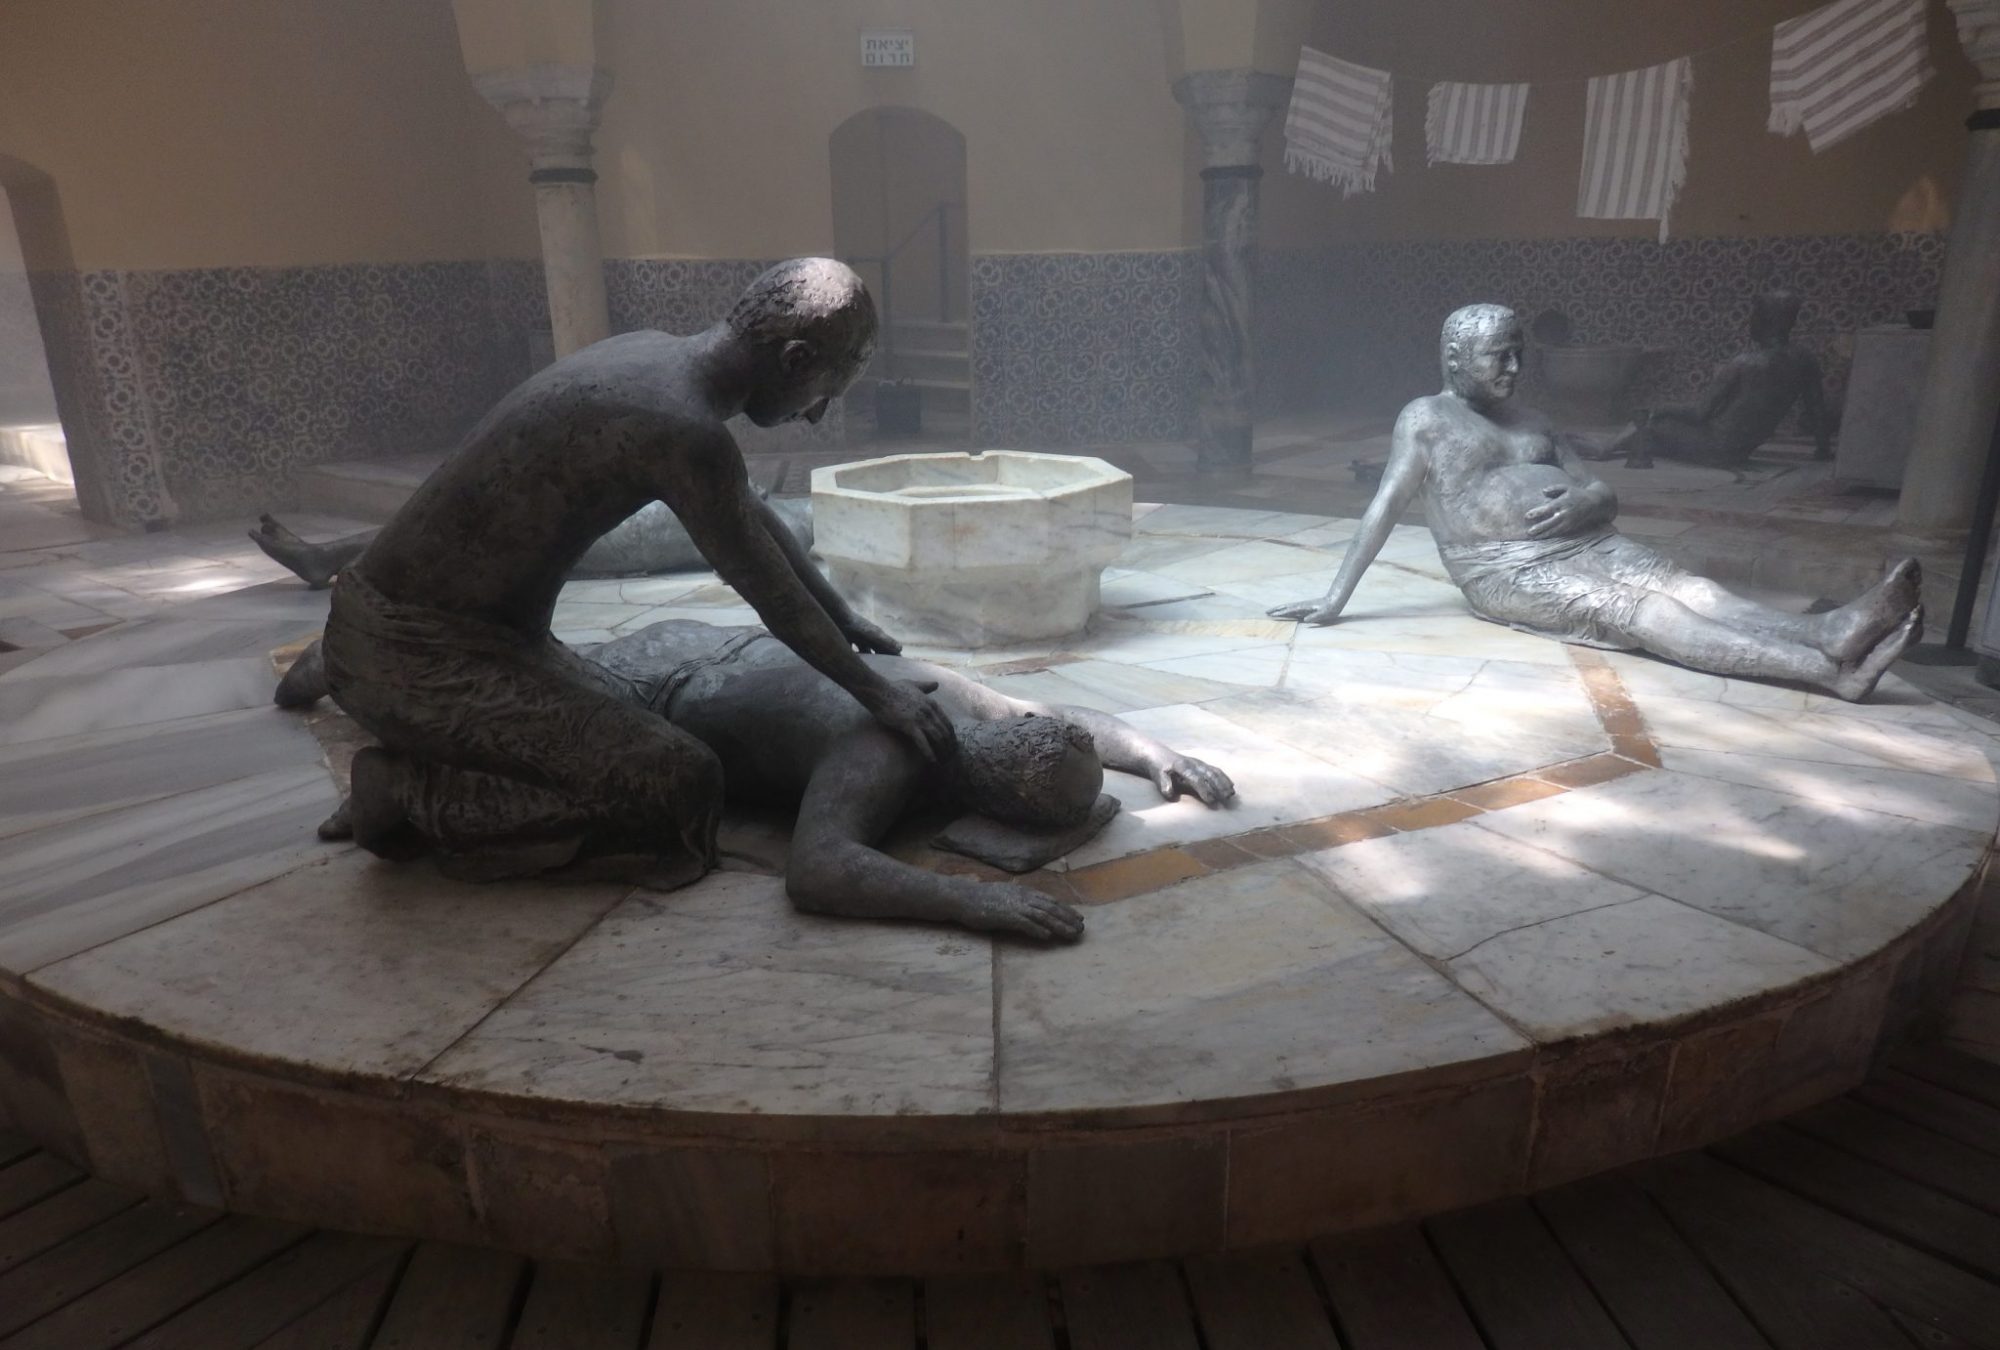 Inside the Turkish bathhouse in Akko old city, statues show what it might have looked like as men enjoyed the steambath or got a massage.